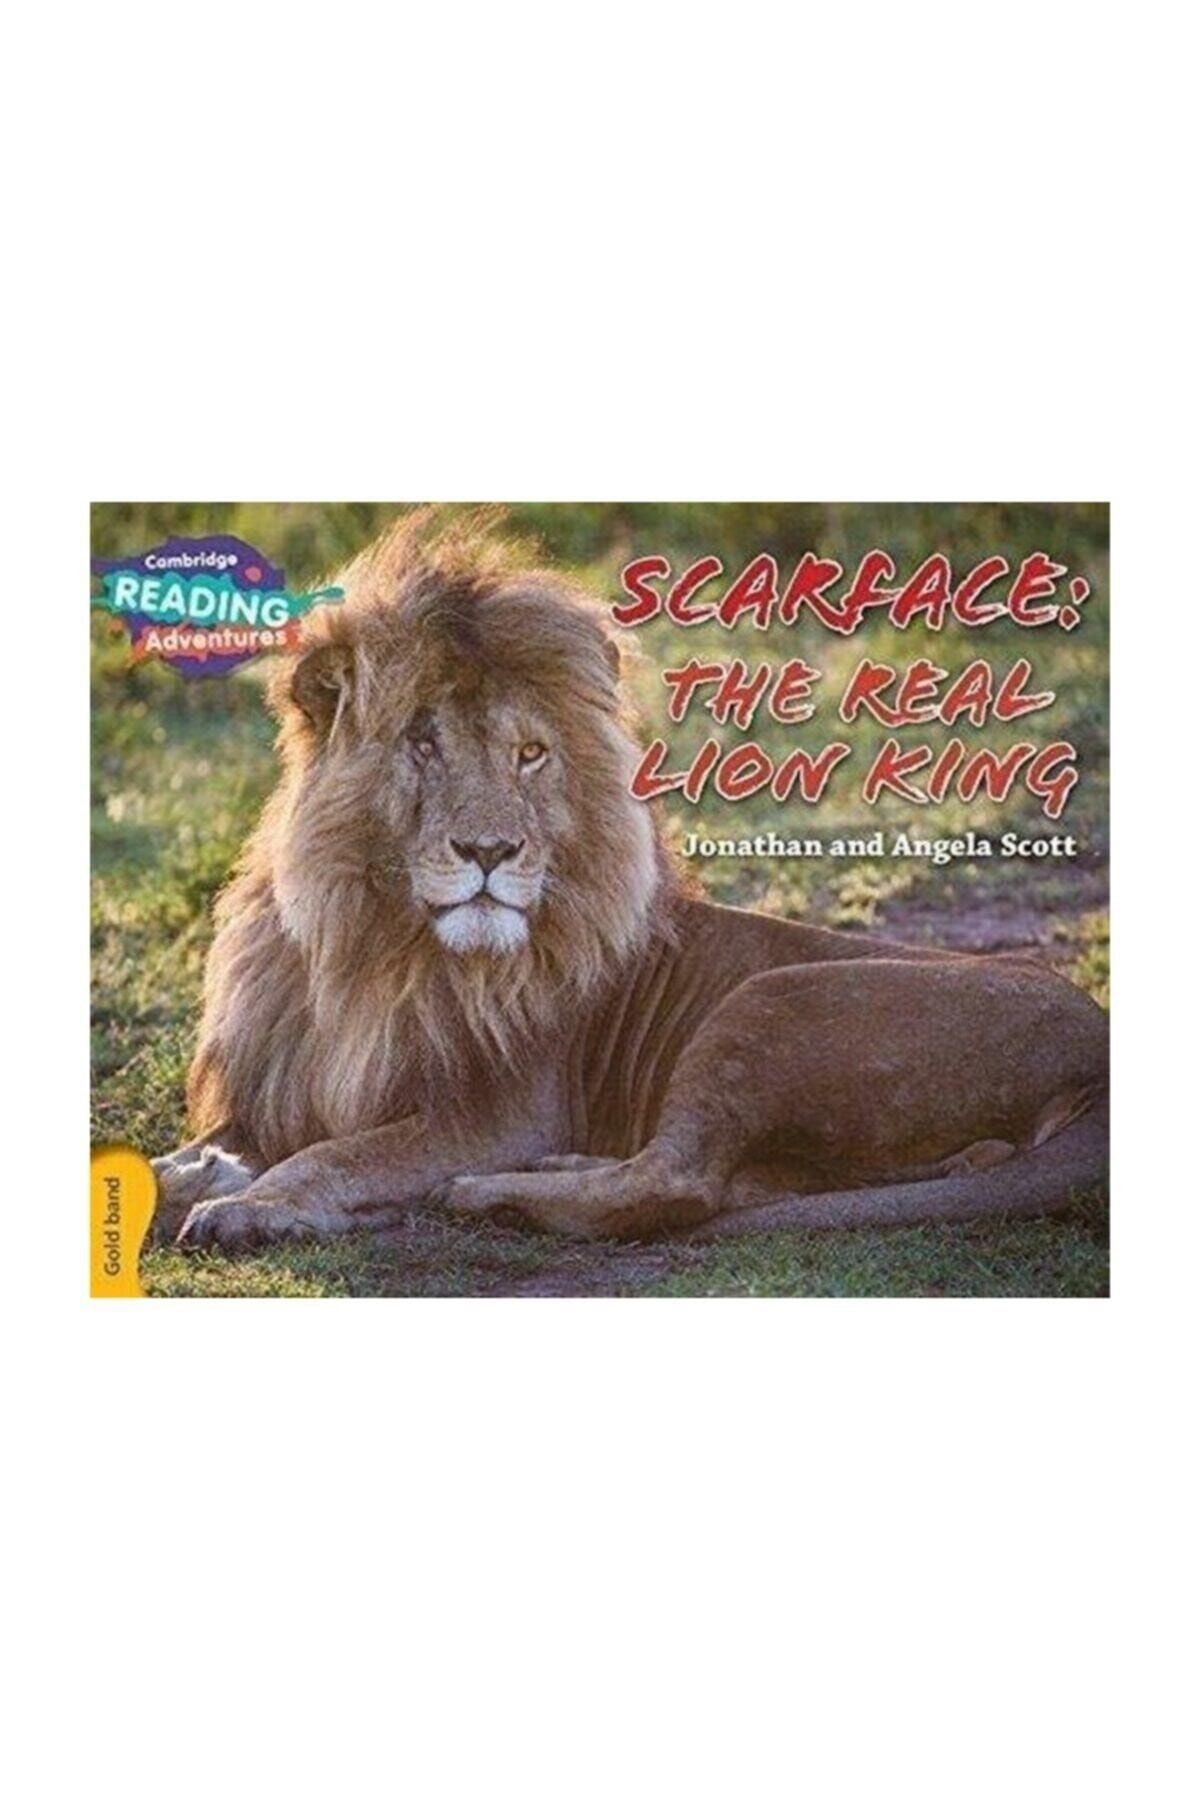 Cambridge University Gold Band- Scarface: The Real Lion King Reading Adventures